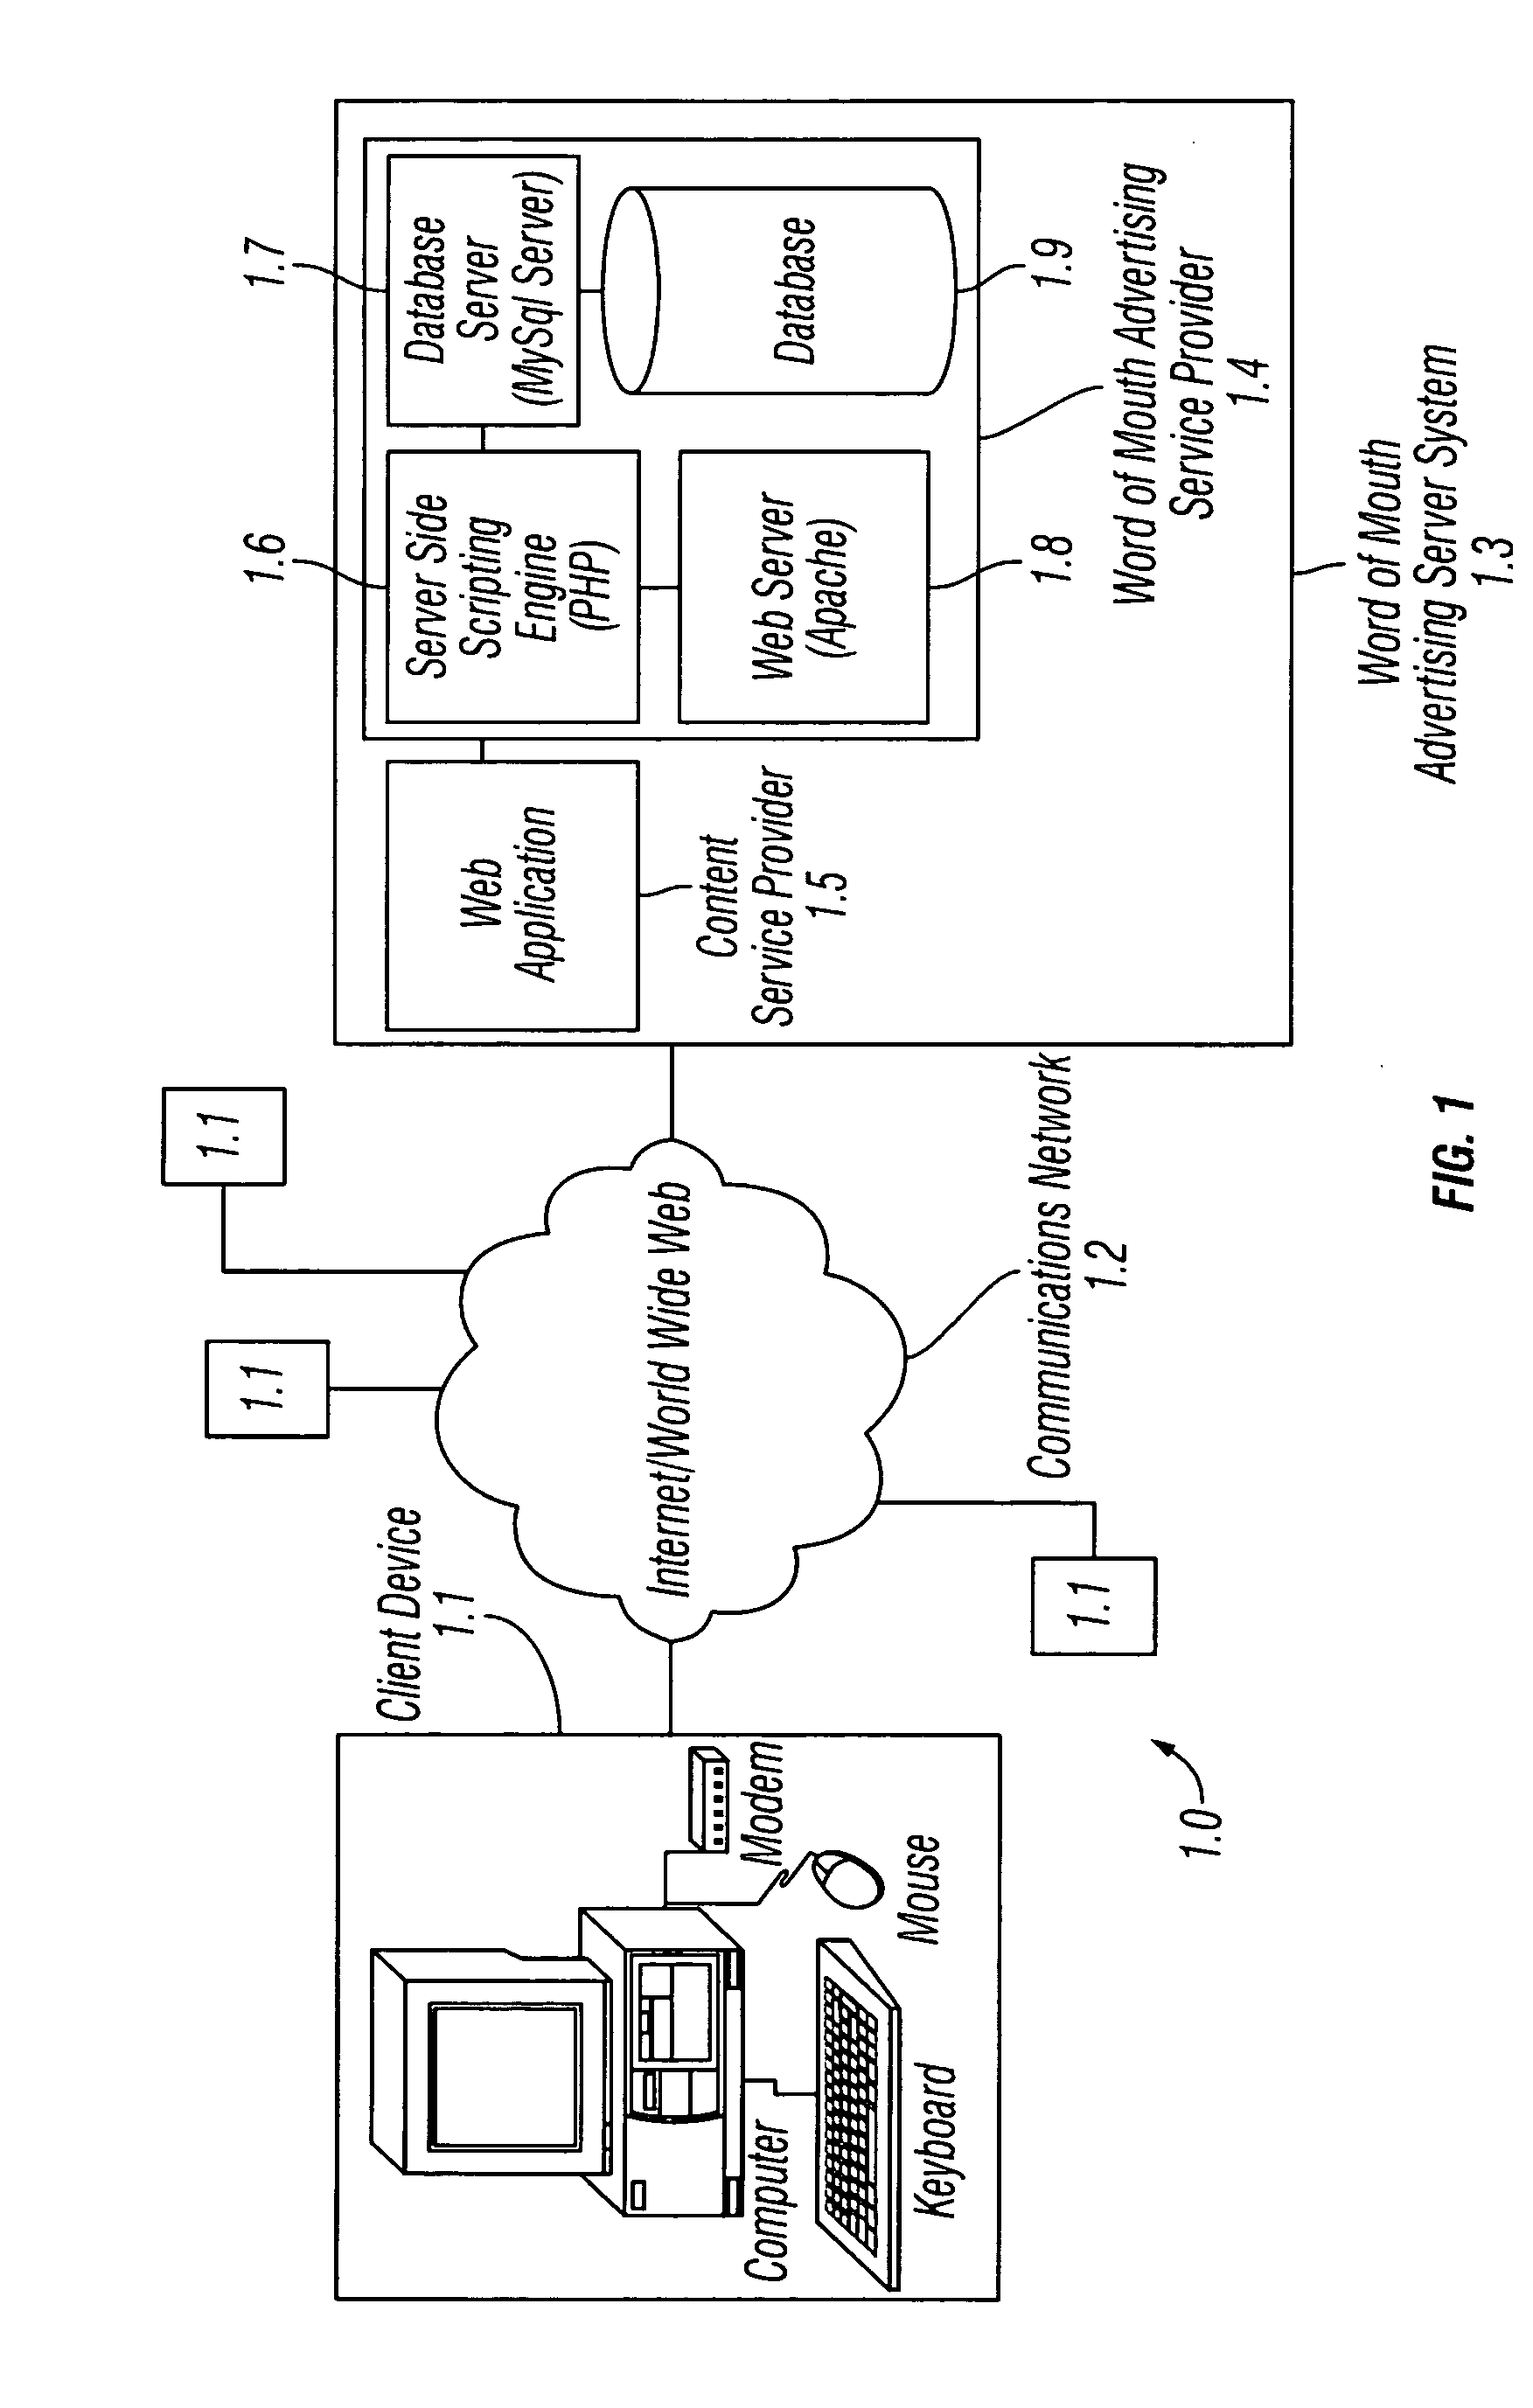 Method and system for word of mouth advertising via a communications network